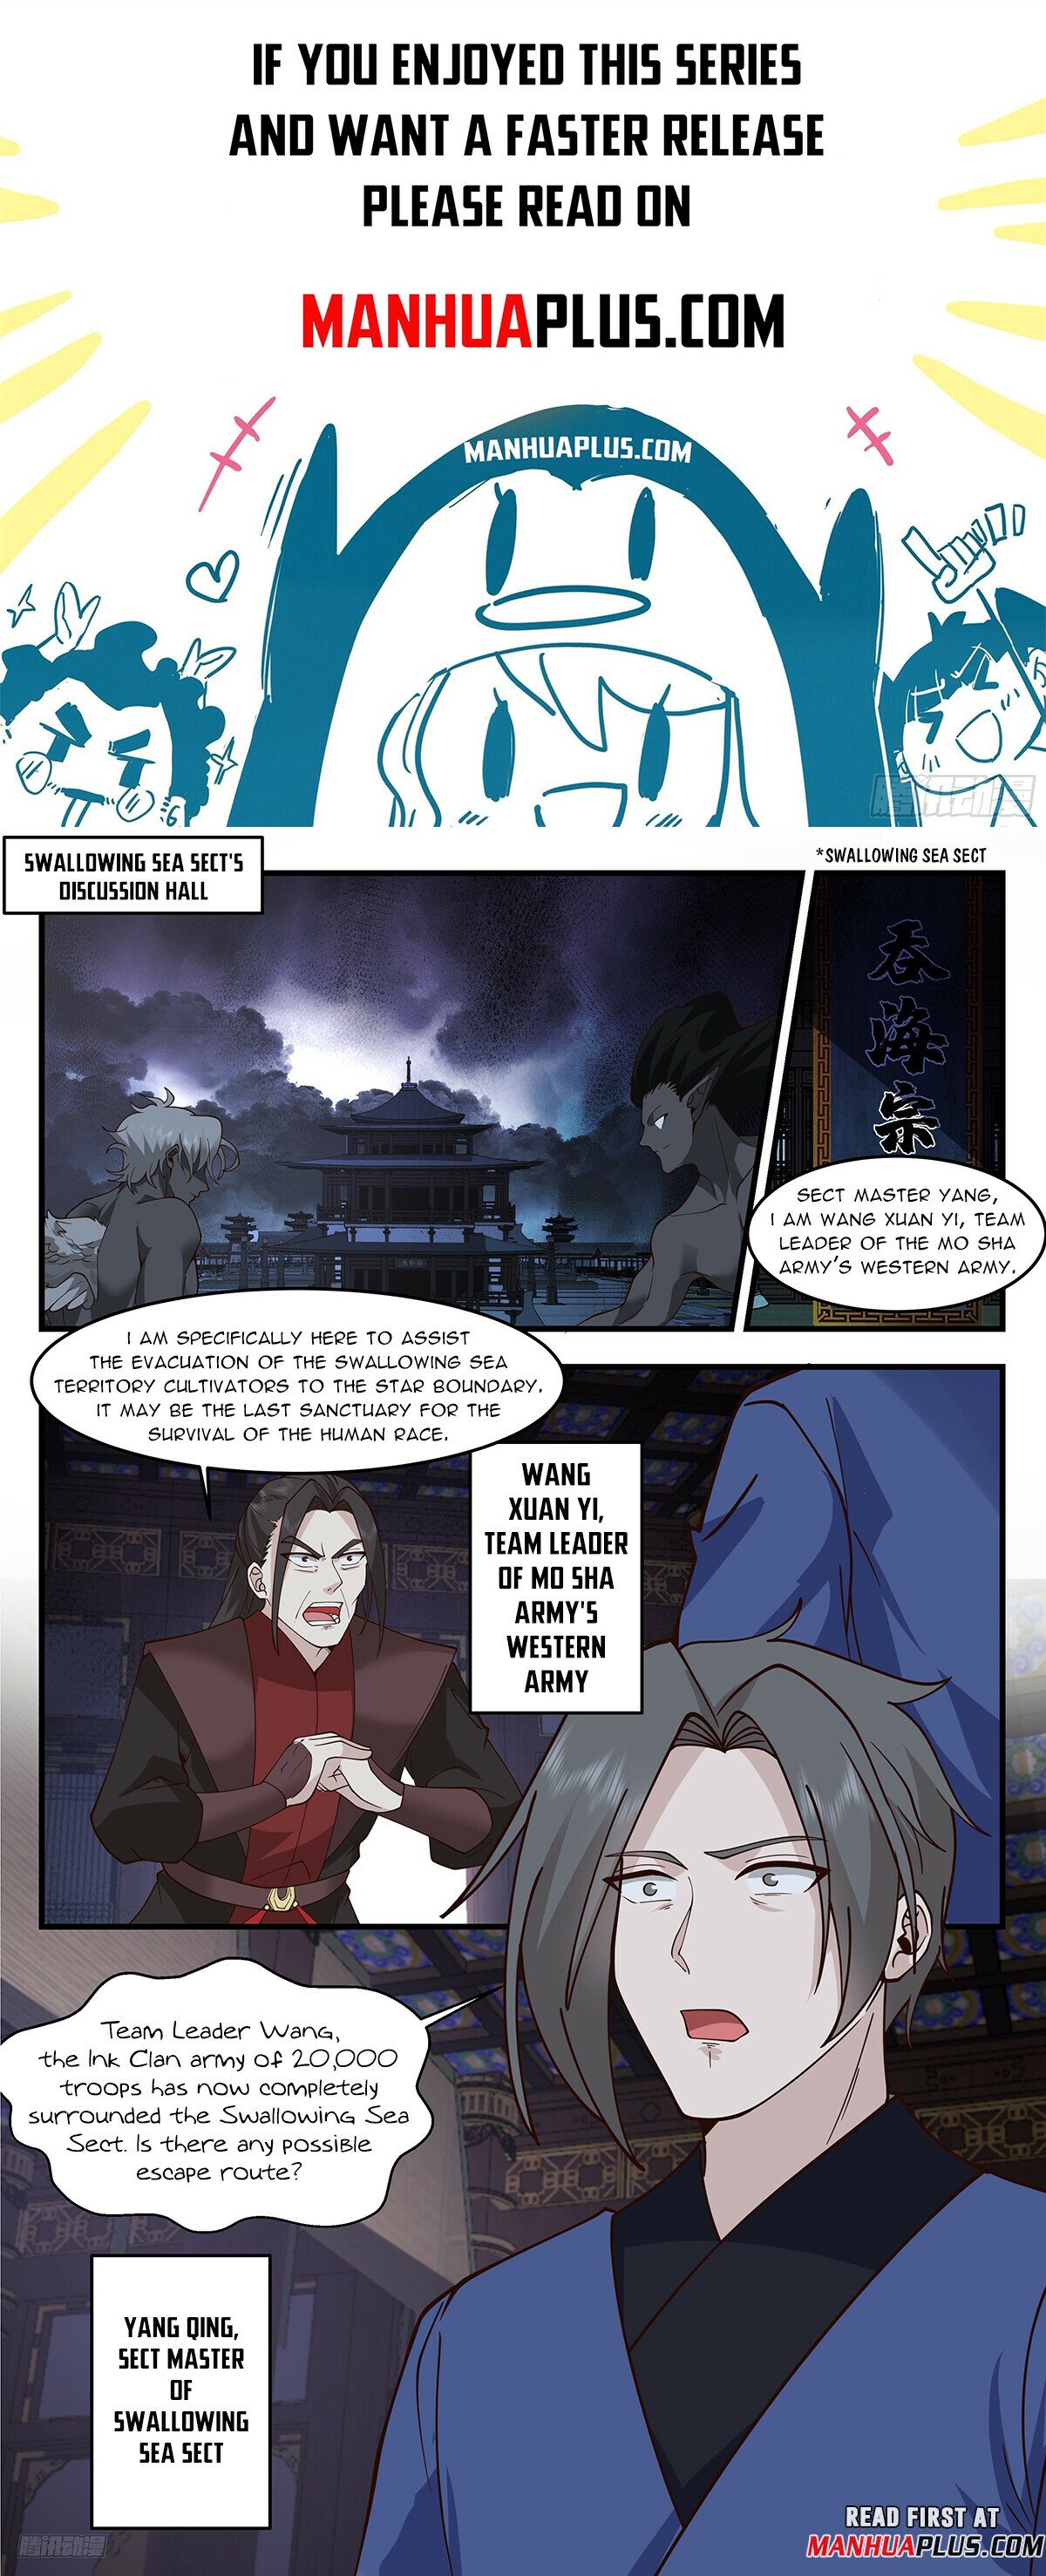 Martial Peak - Chapter 25775 - Assisting Swallowing Sea Sect - Image 1